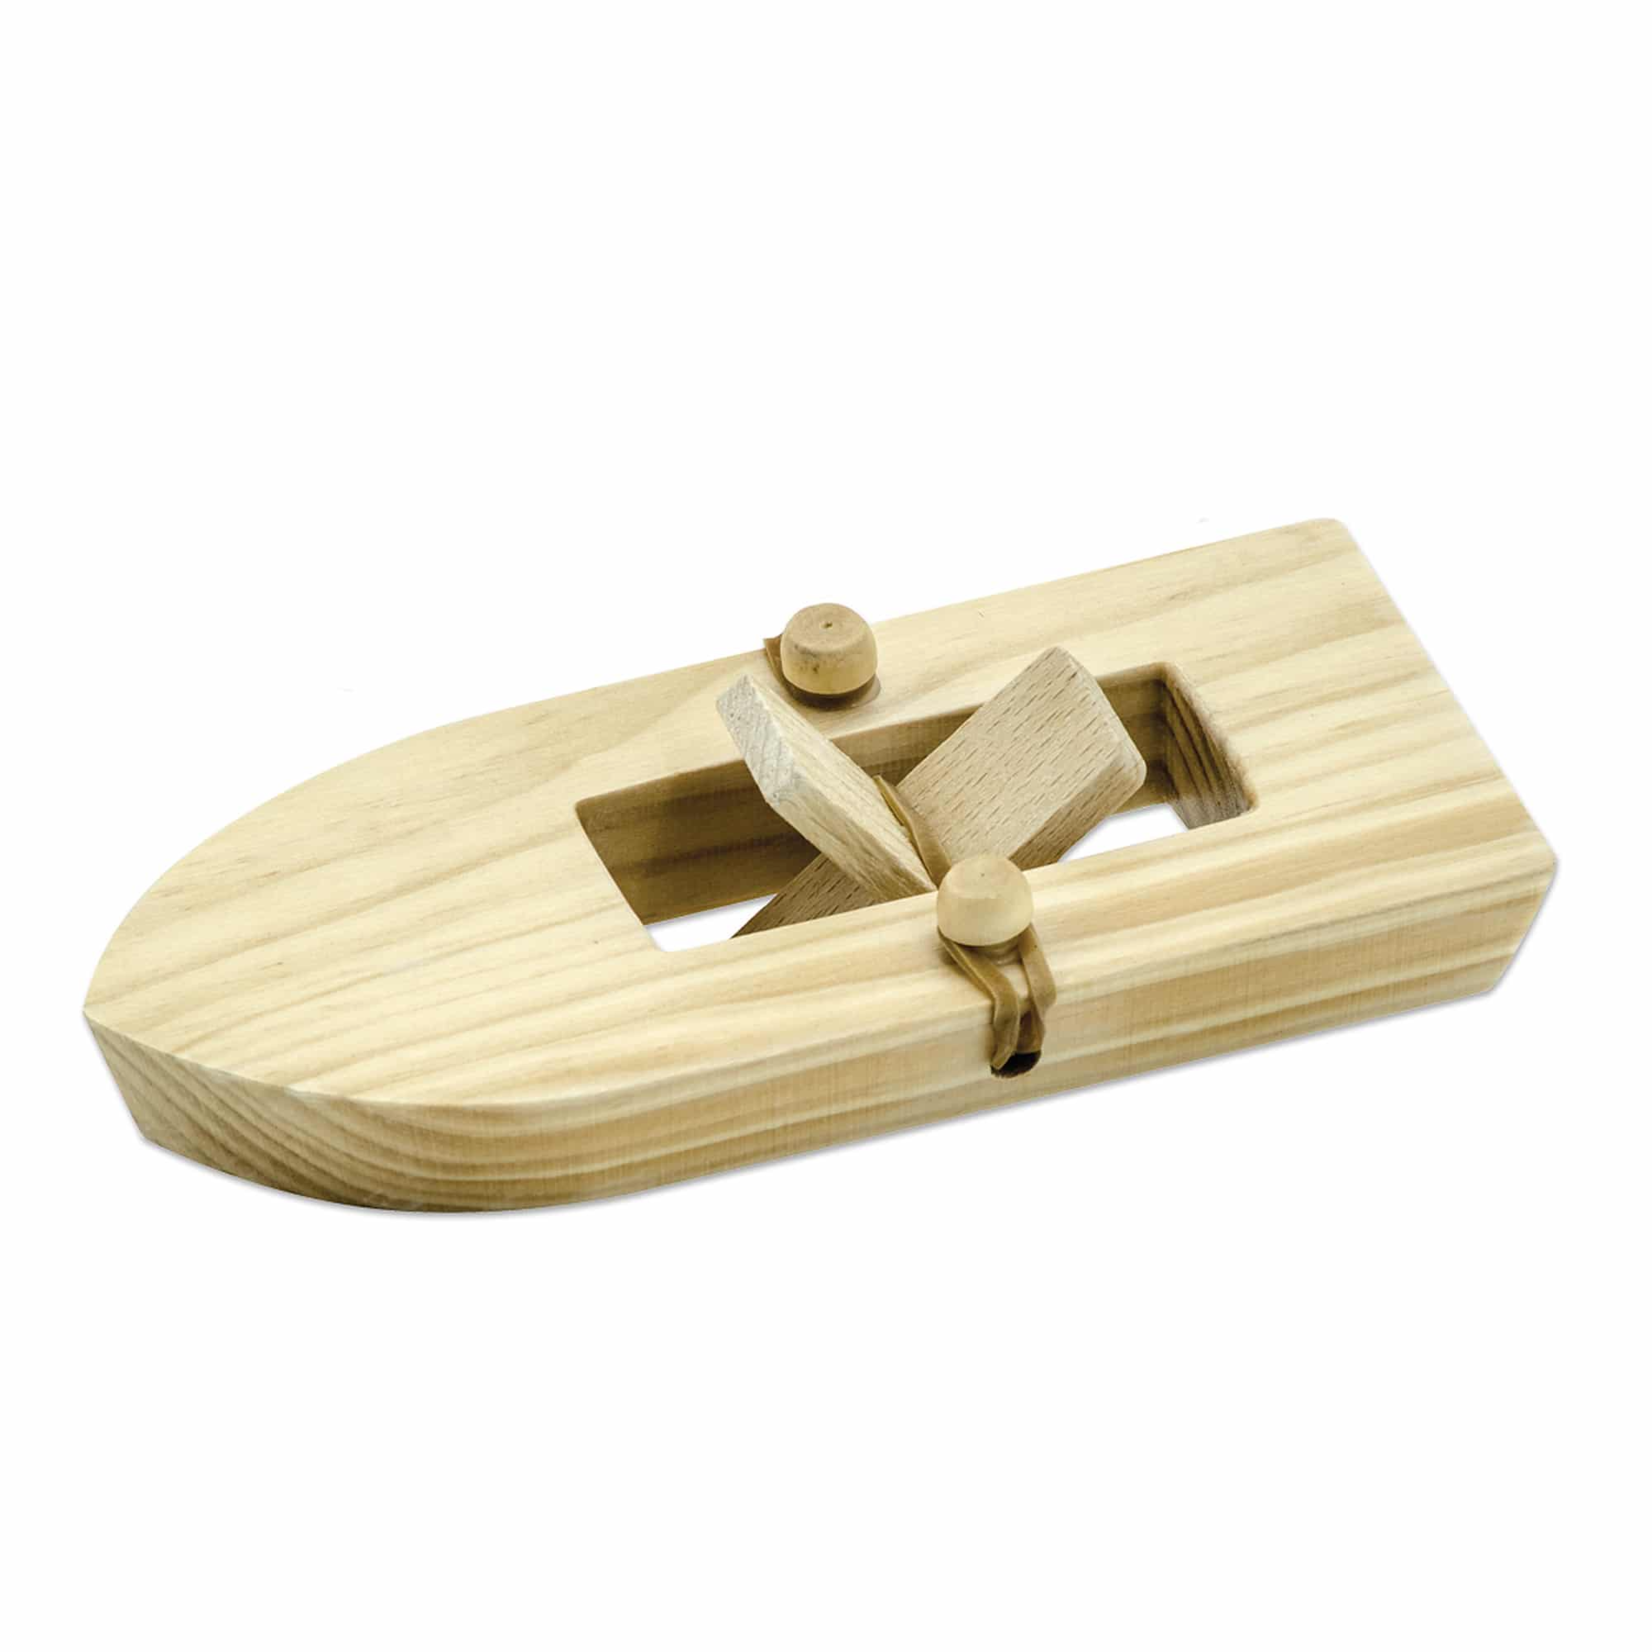 Schylling Paddle Boat - Rubber Band